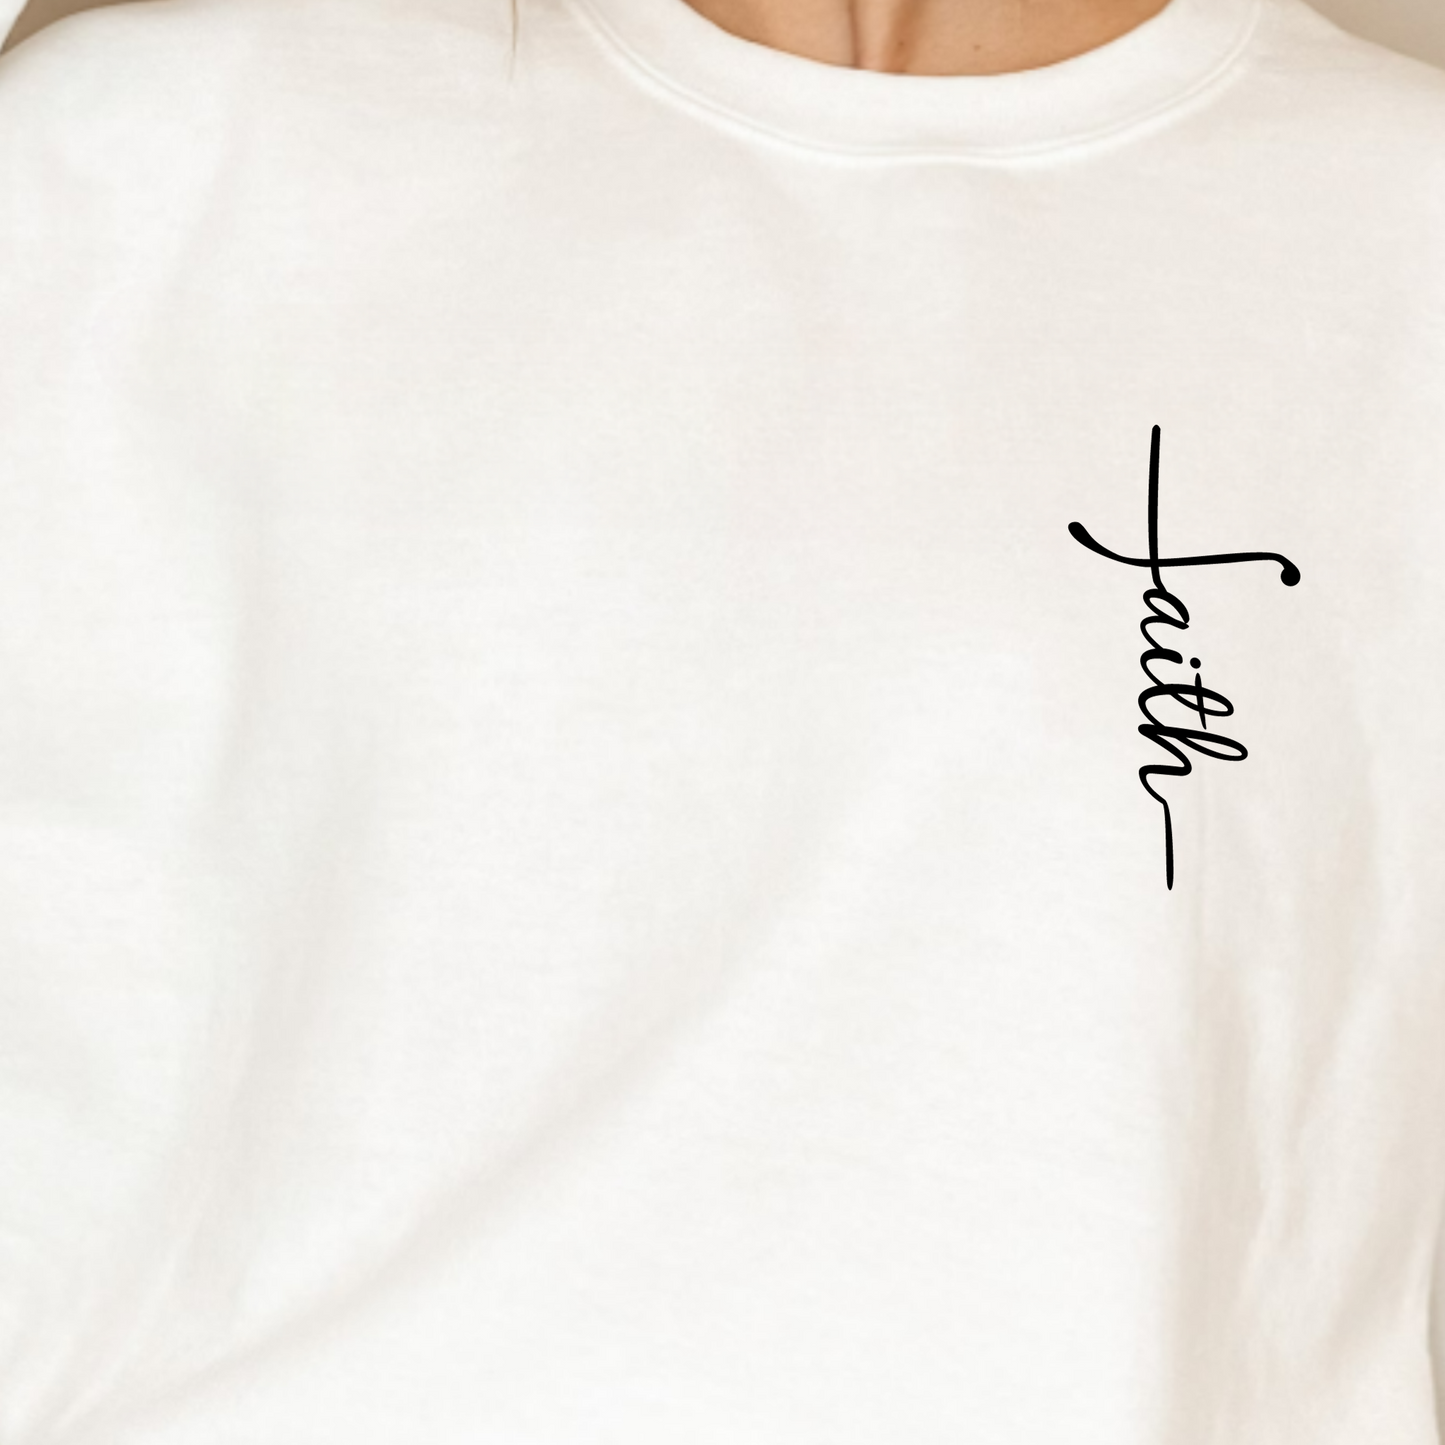 (shirt not included) Faith Pocket - Matte Clear Film Transfer